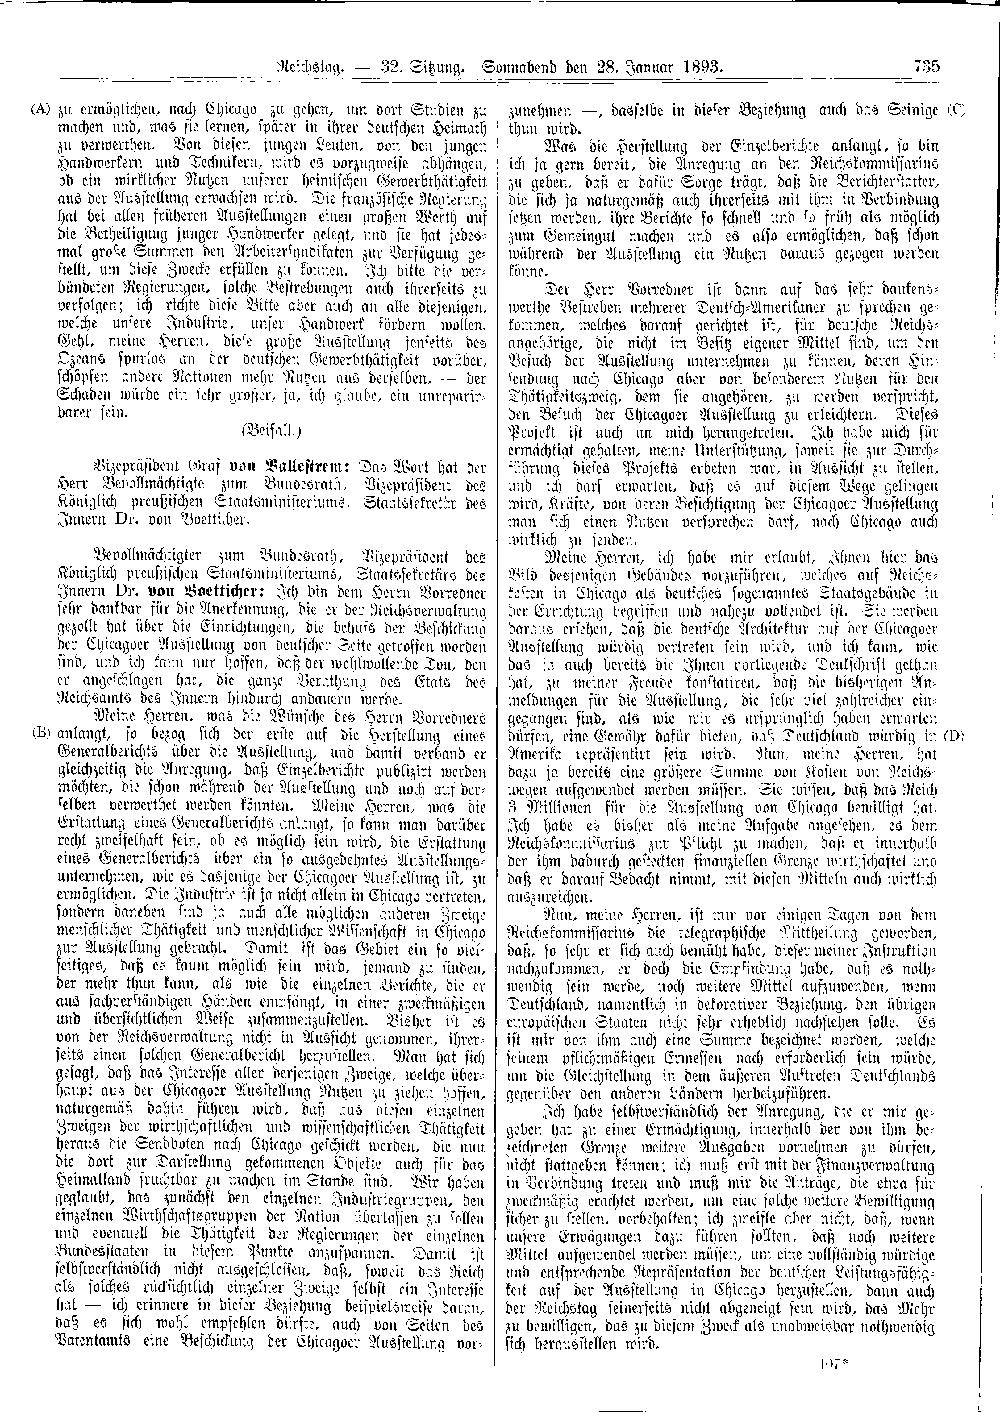 Scan of page 735